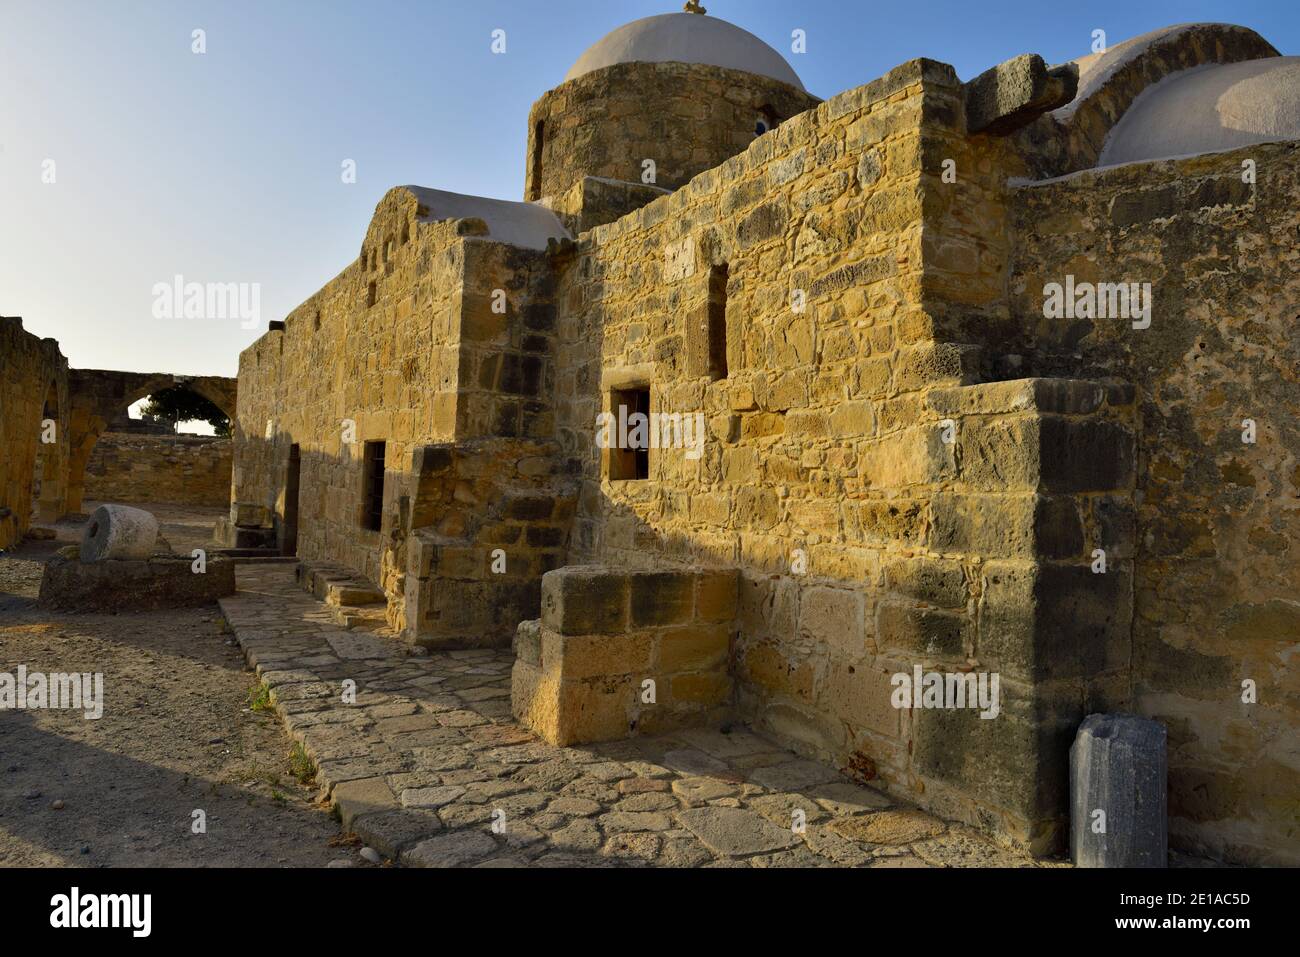 Old stone built Greek Orthodox church from about 12th to 13th century with remains of stone arches from earlier structure, Panagia Katholiki, Kouklia, Stock Photo